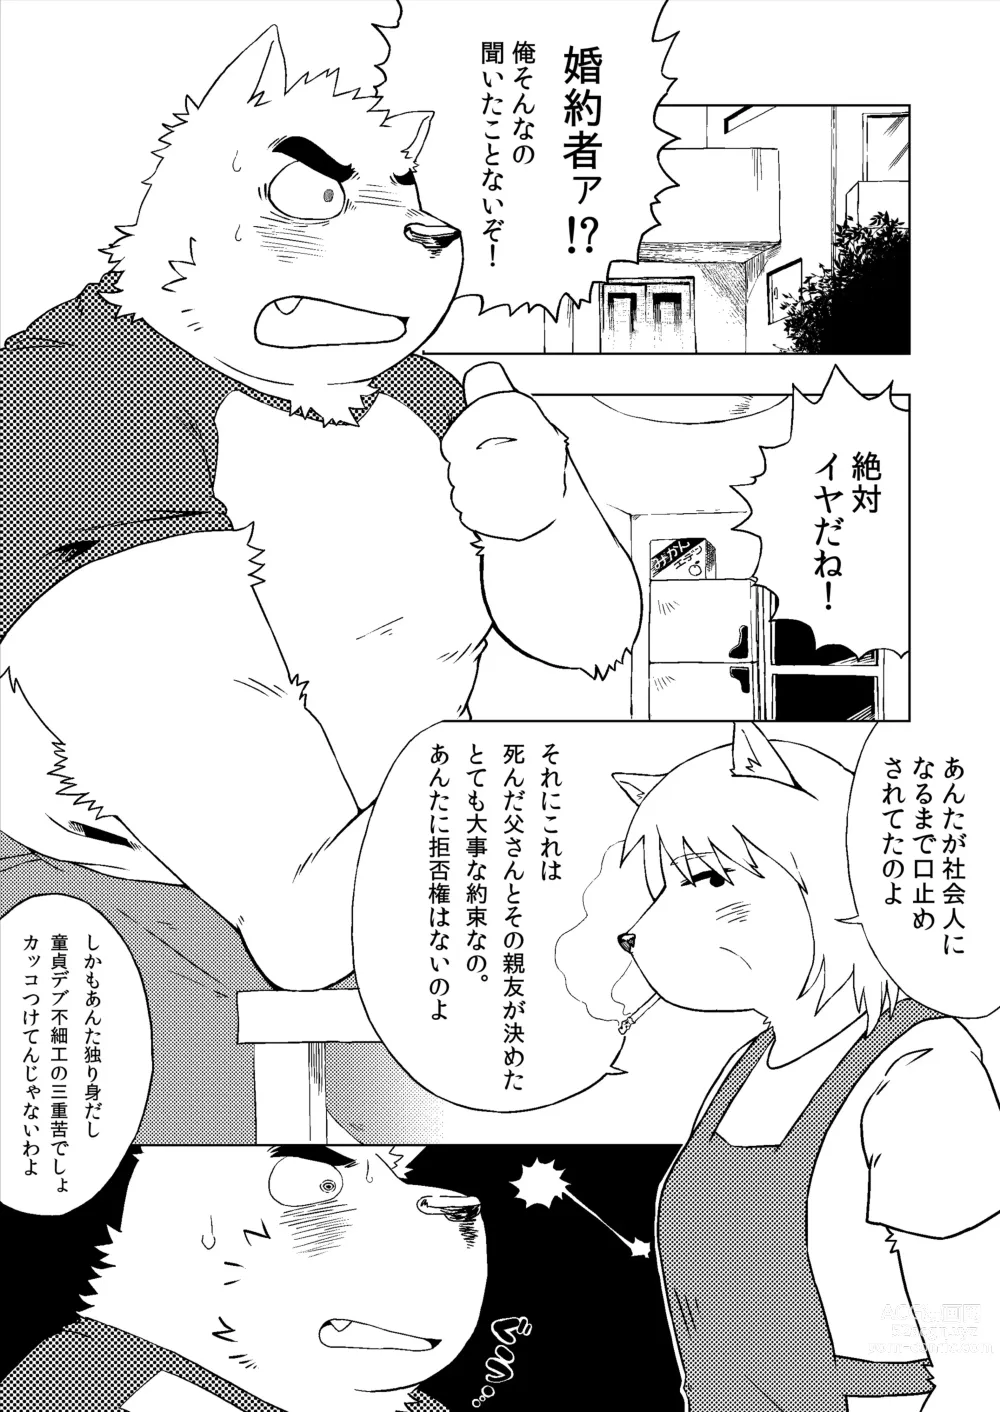 Page 2 of doujinshi Is it true that you are getting married!?